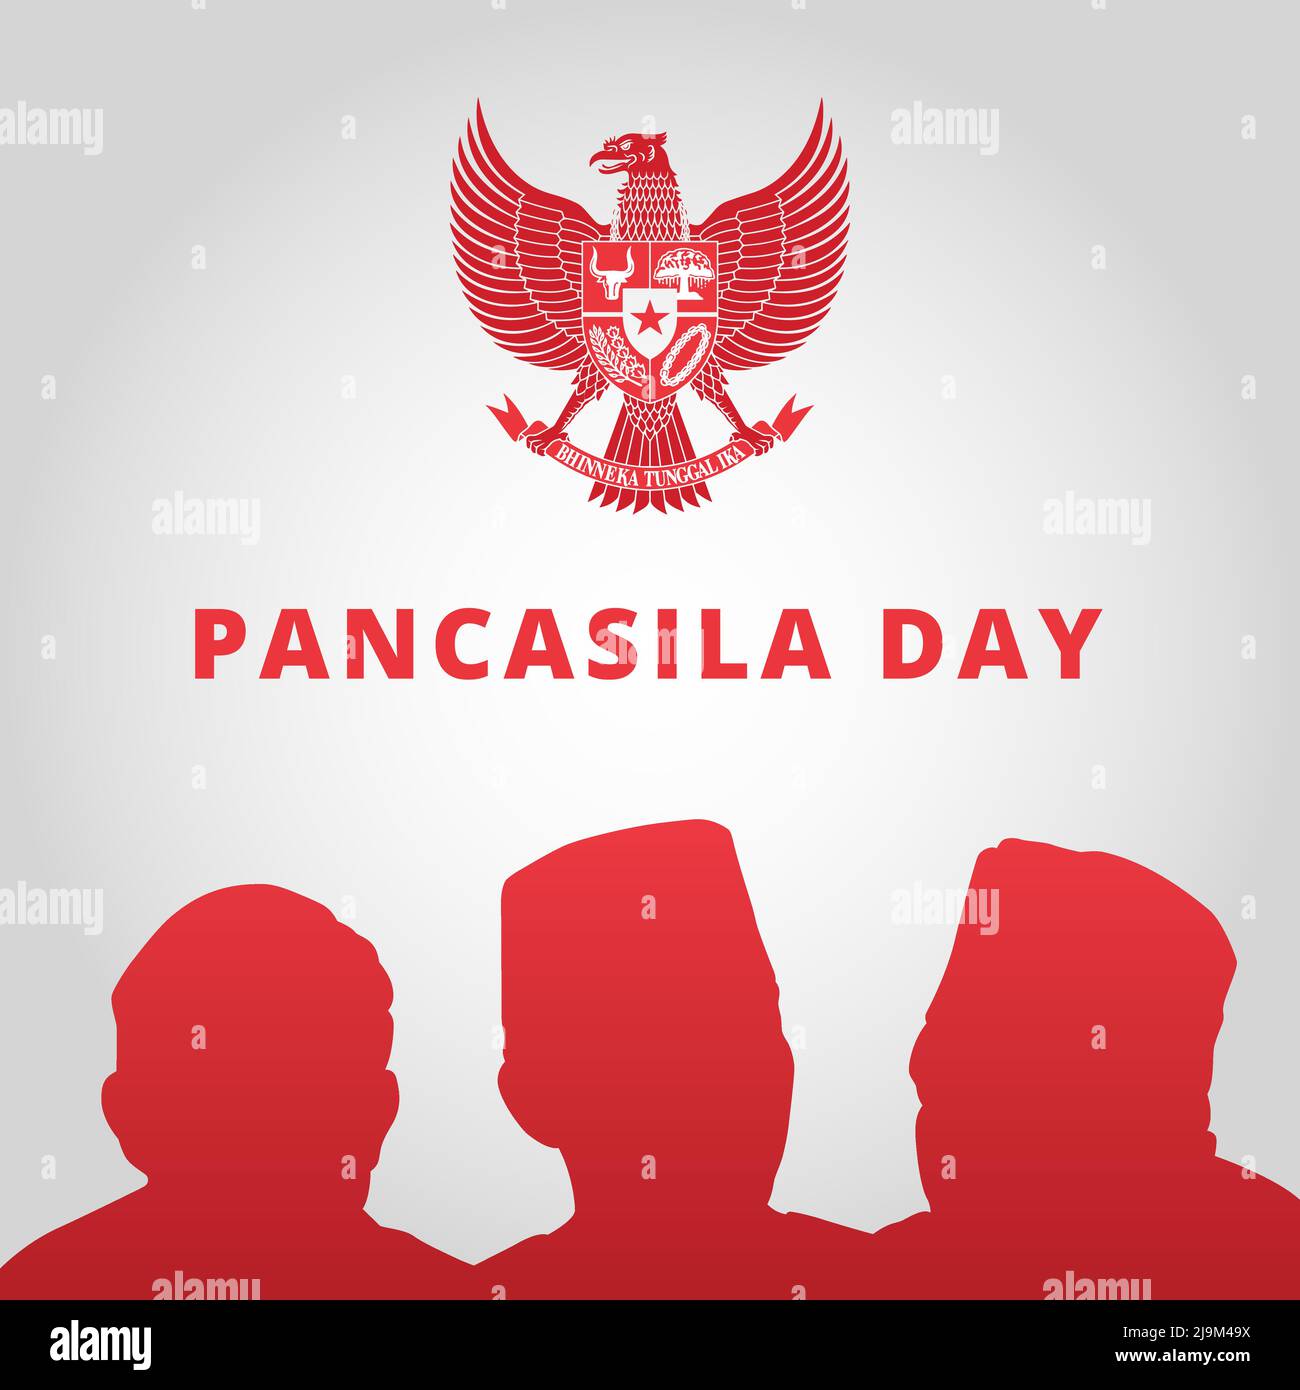 Pancasila Day With Silhouette The Founding Fathers And Symbol Indonesia